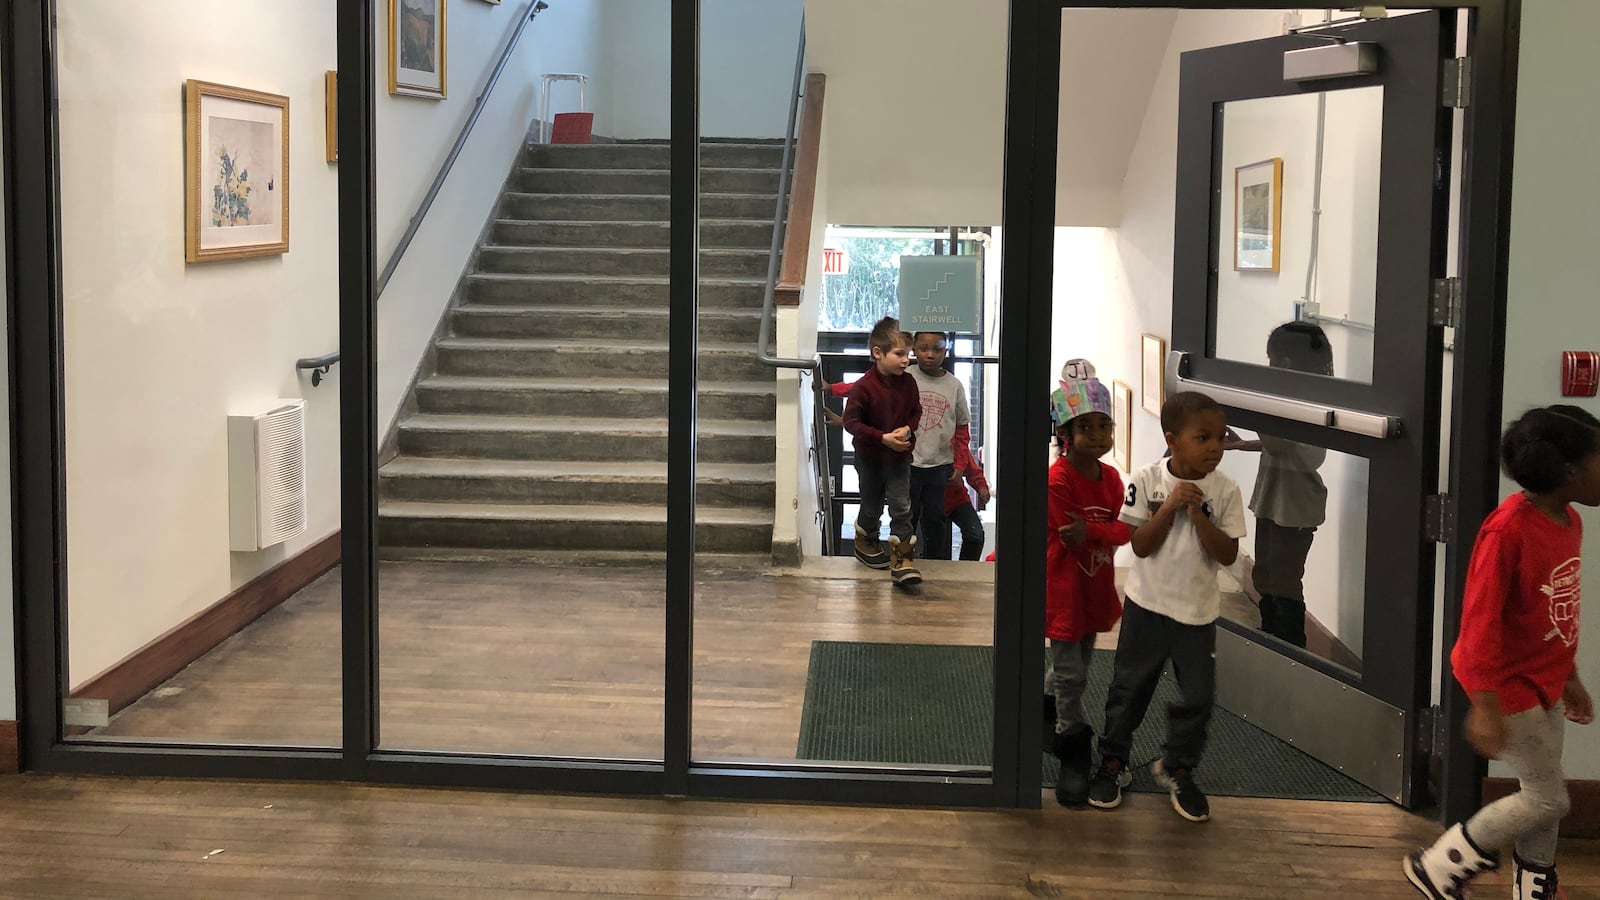 Students walk through the hallways at Detroit Prep, a charter school that is among more than 800 K-12 schools in the state that must close to slow the spread the coronavirus.